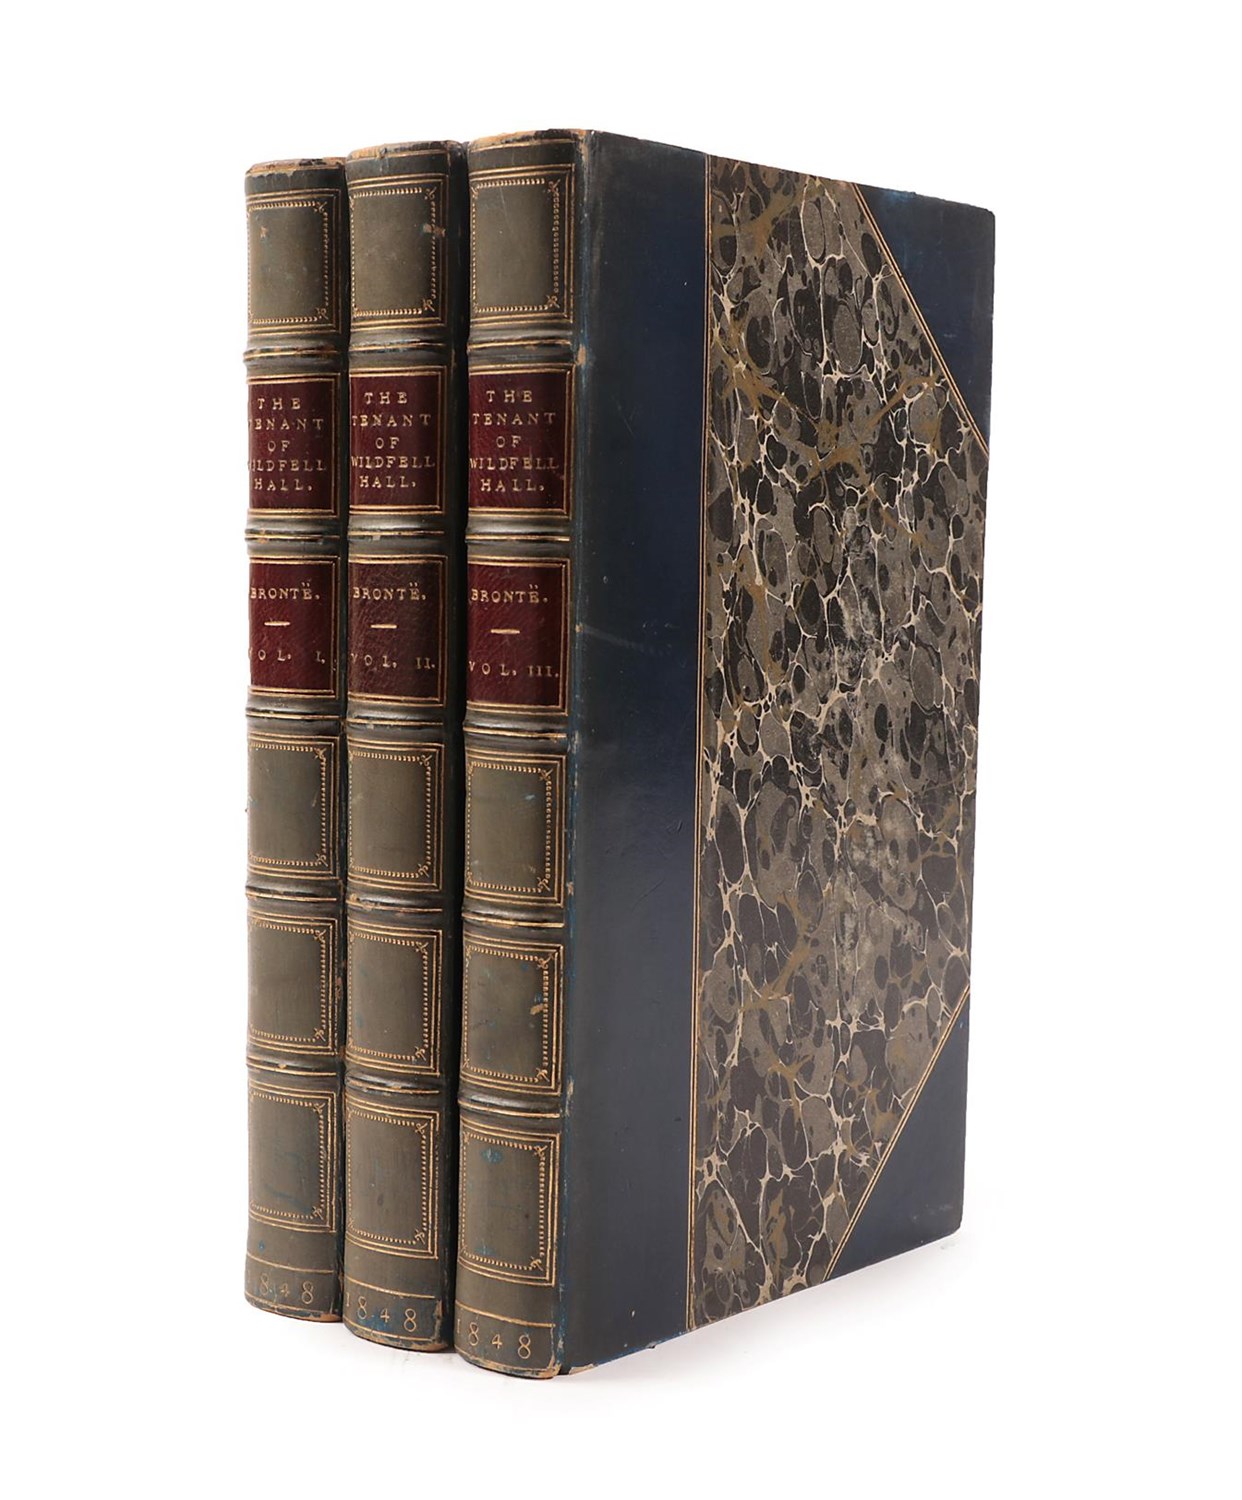 Lot 3066 - [Bronte (Anne)] Bell (Acton), The Tennant of Wildfell Hall, T.C. Newby, 1848, first edition, second